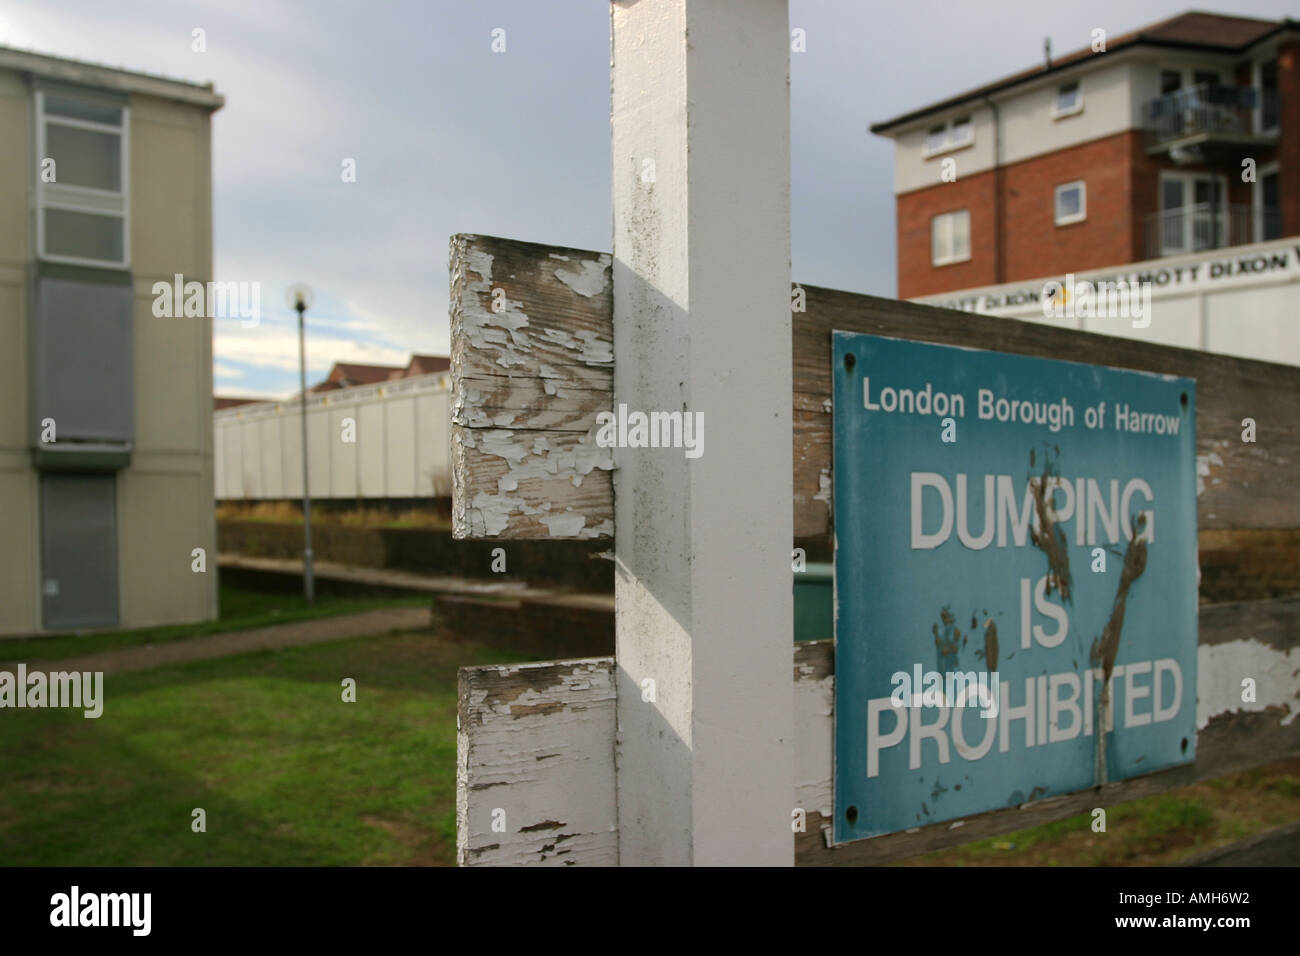 Signage prohibiting dumping with social housing about to be renovated (left) and renovated social housing (right). Stock Photo